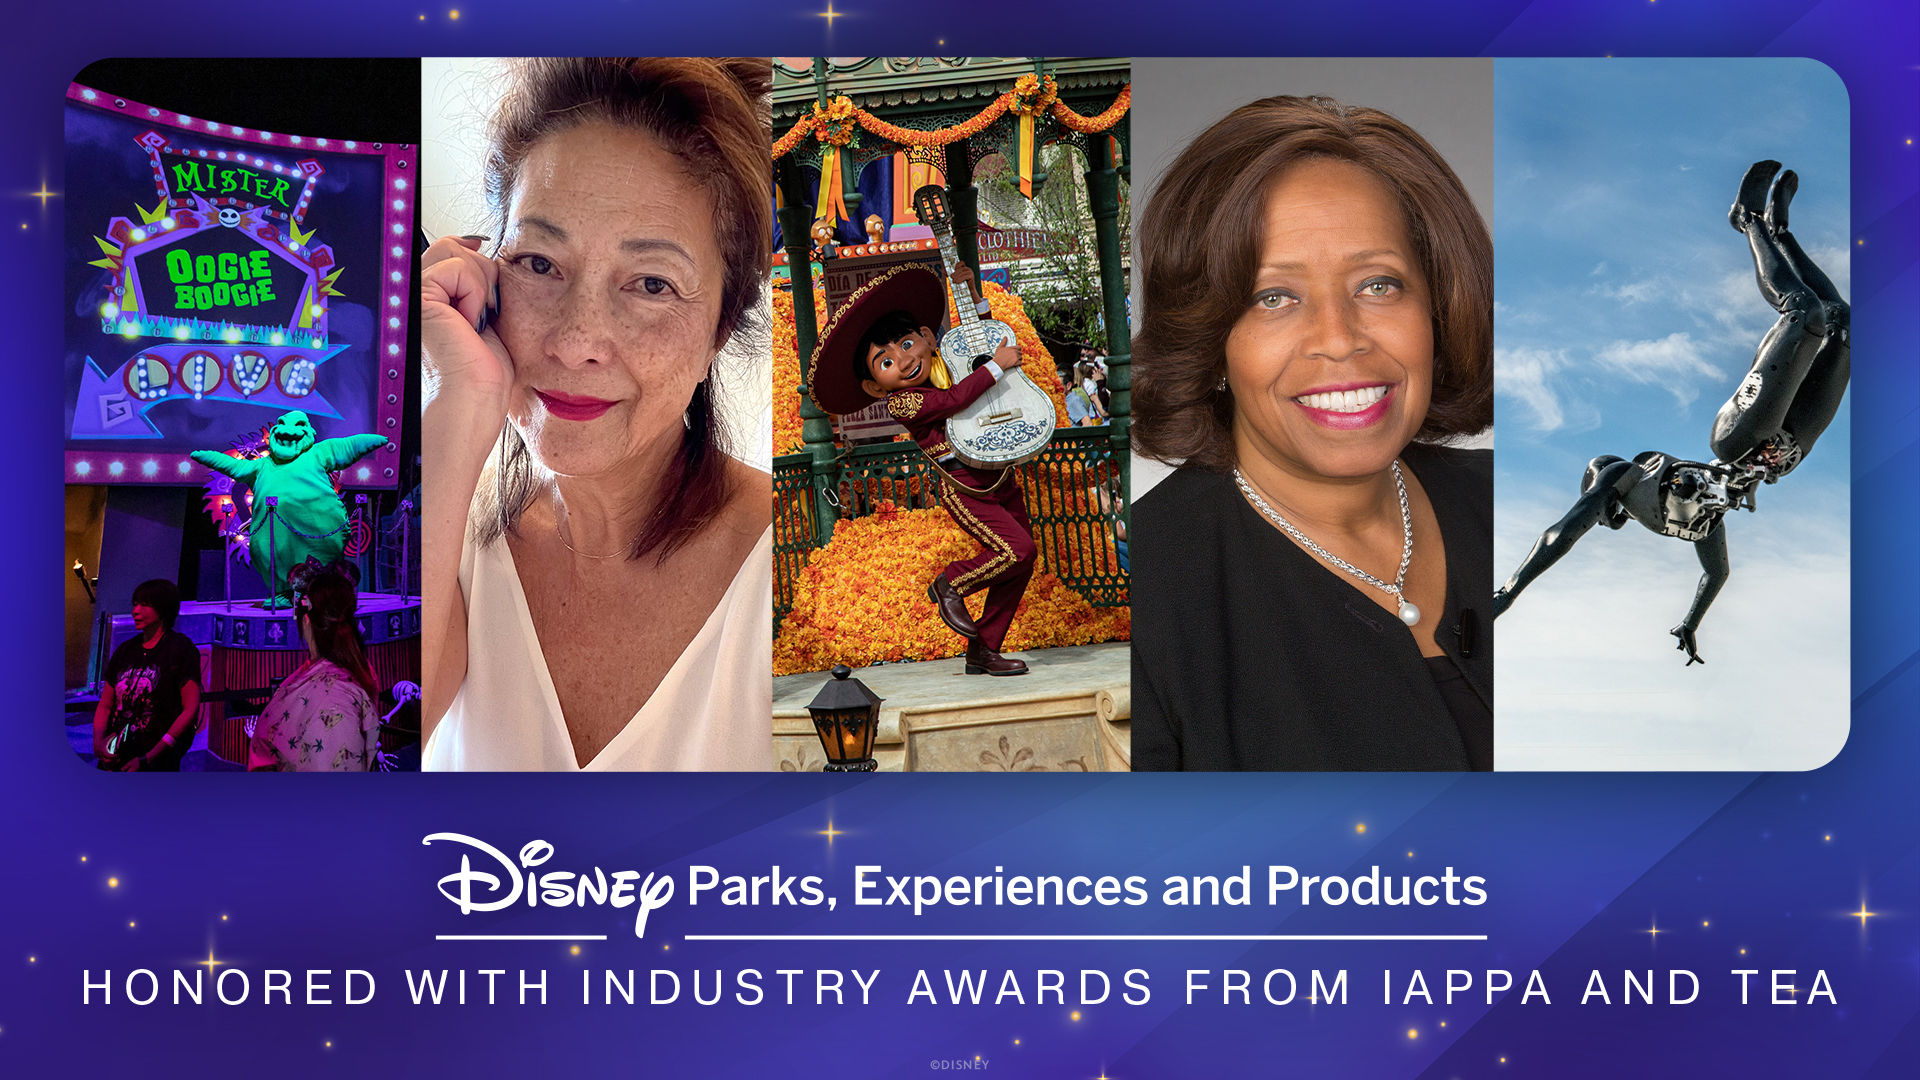 Disney Parks, Experiences and Products Honored with Industry Awards, Imagineers Recognized by Themed Entertainment Association